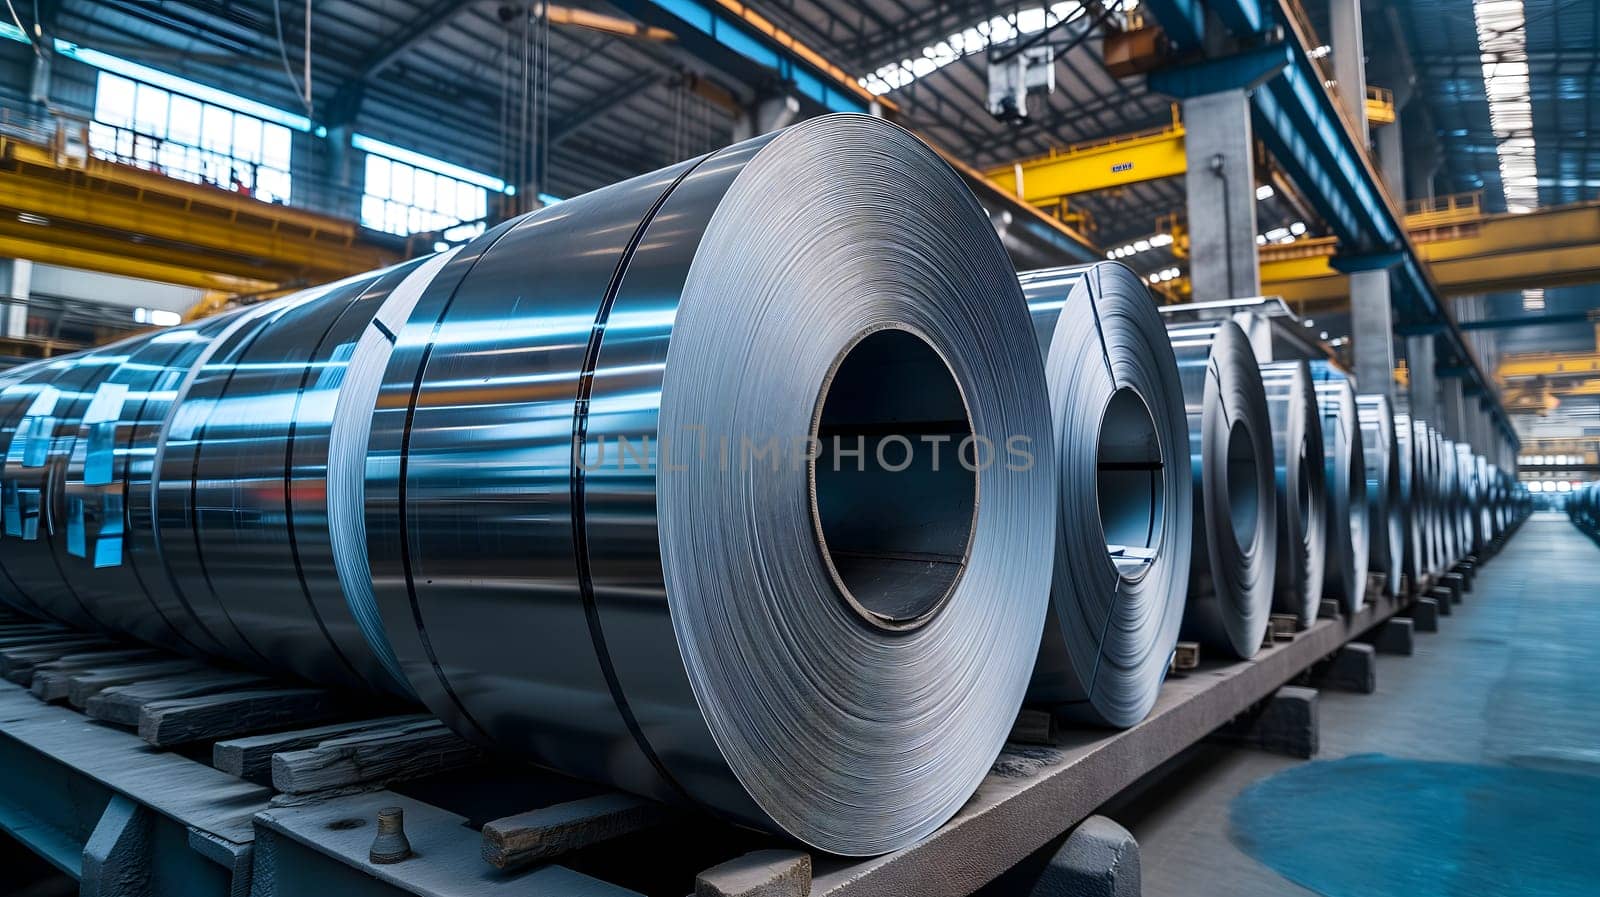 Packed rolls of steel sheet, Cold rolled steel coils in a warehouse by z1b